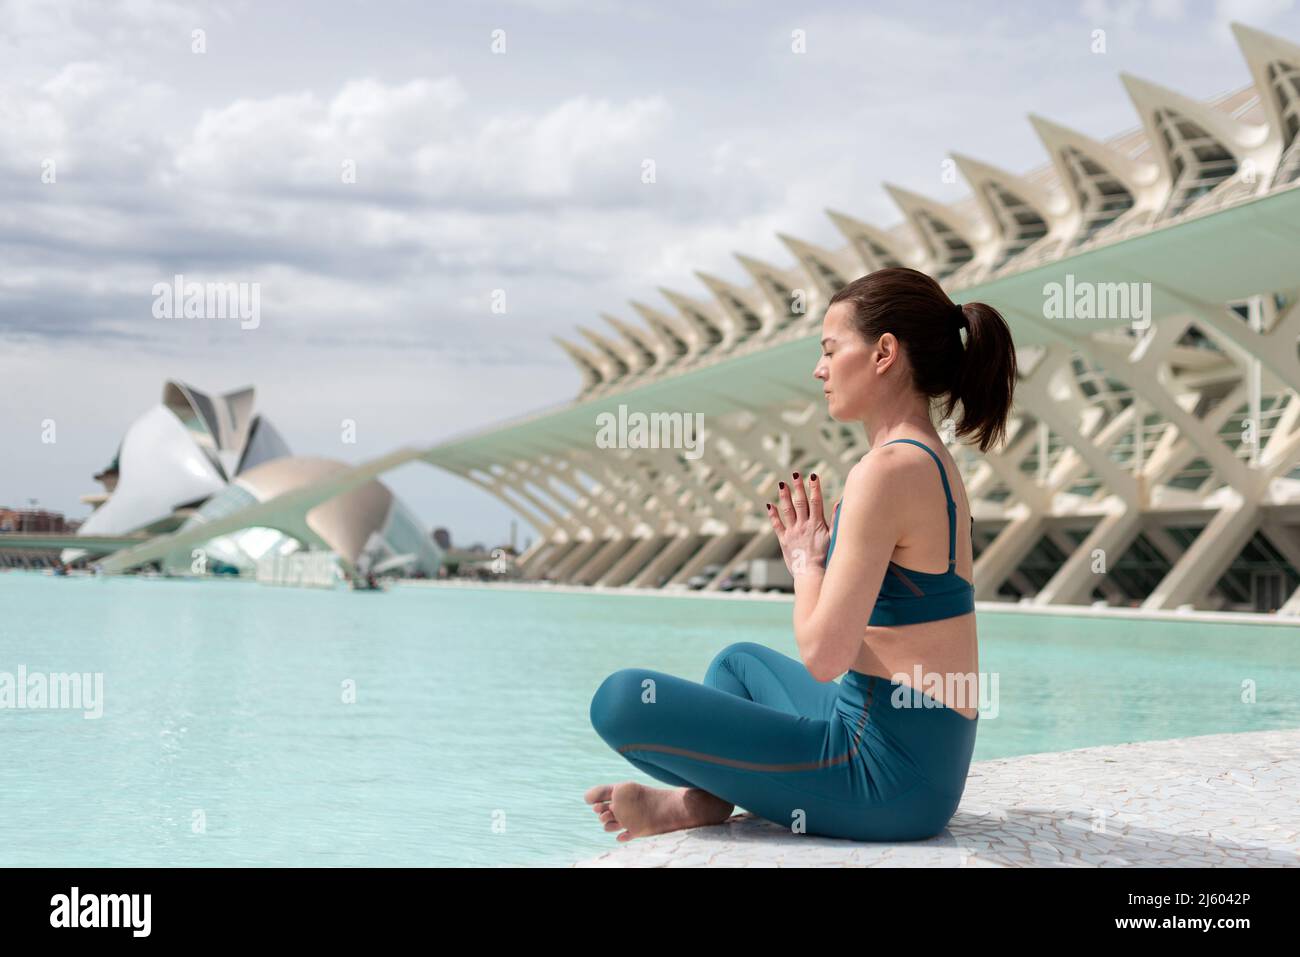 Woman practicing yoga beside the water at the City of Arts and Sciences, Valencia, Spain. Stock Photo